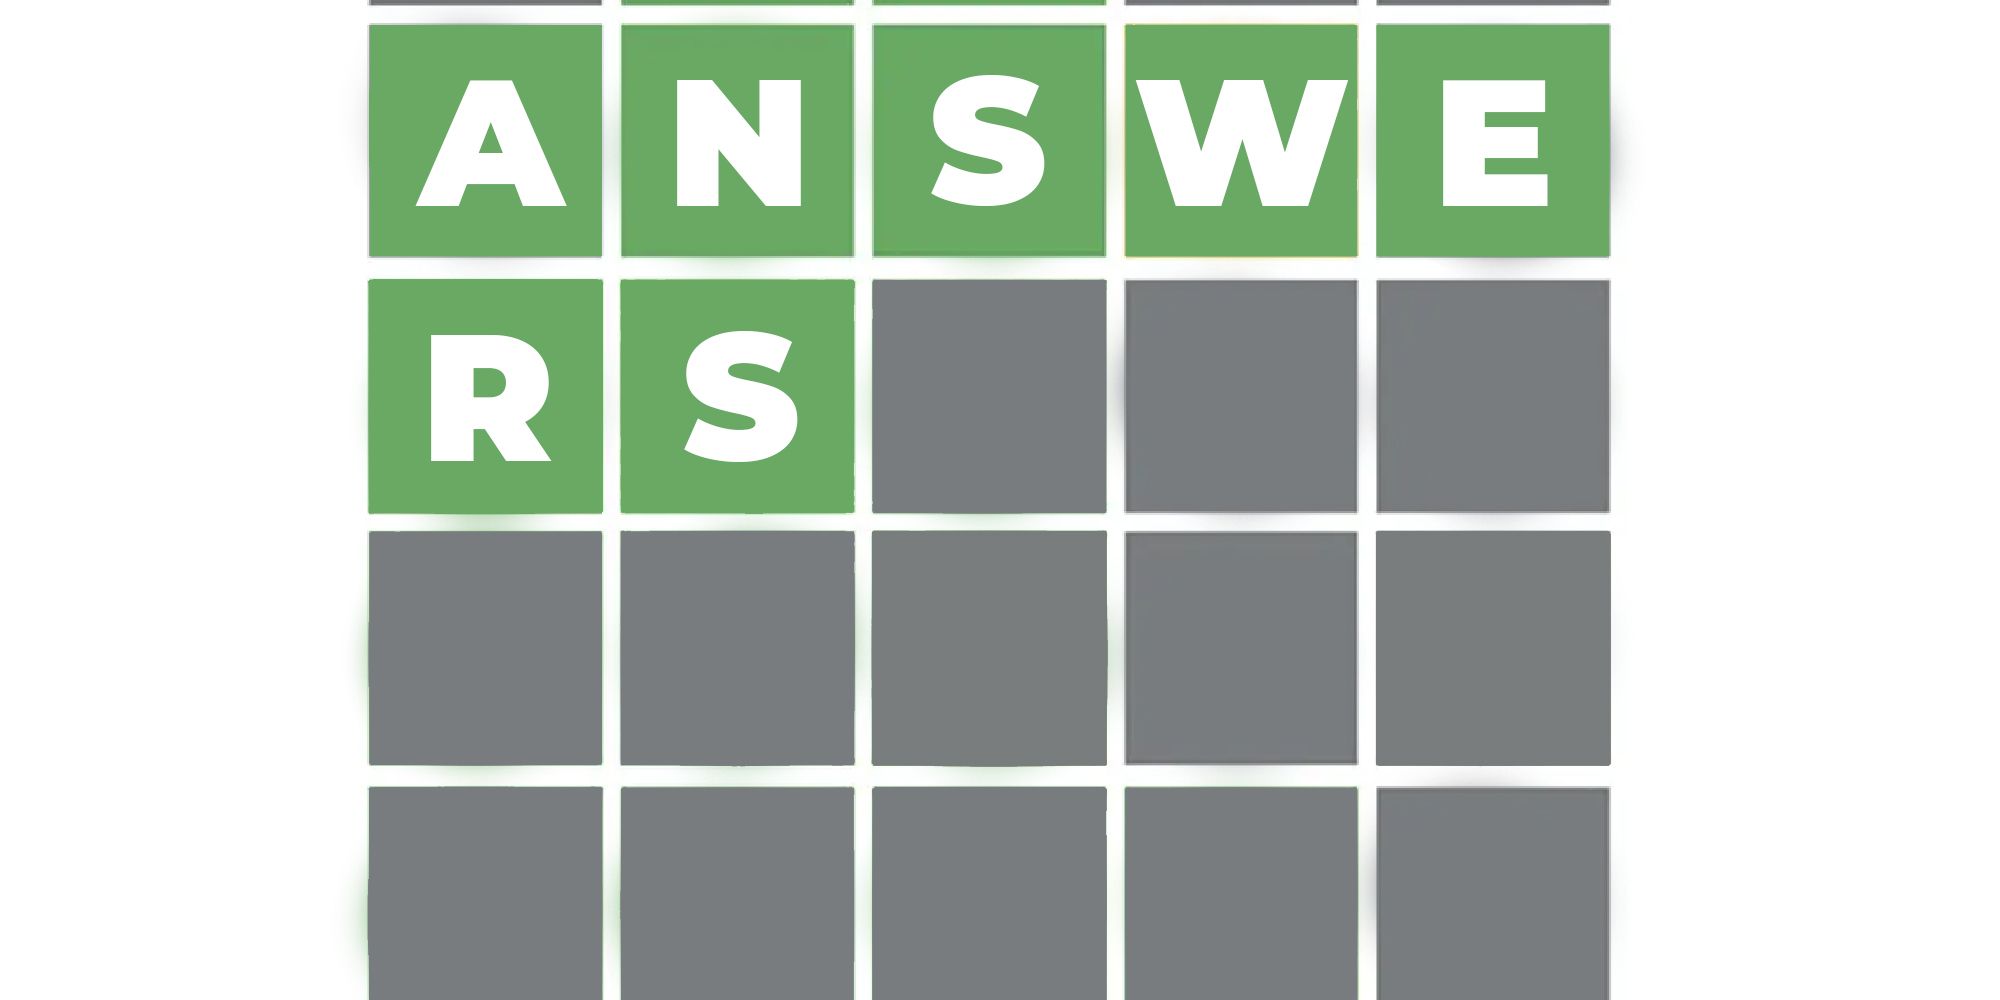 A Wordle grid with the word 'Answers' written on it.